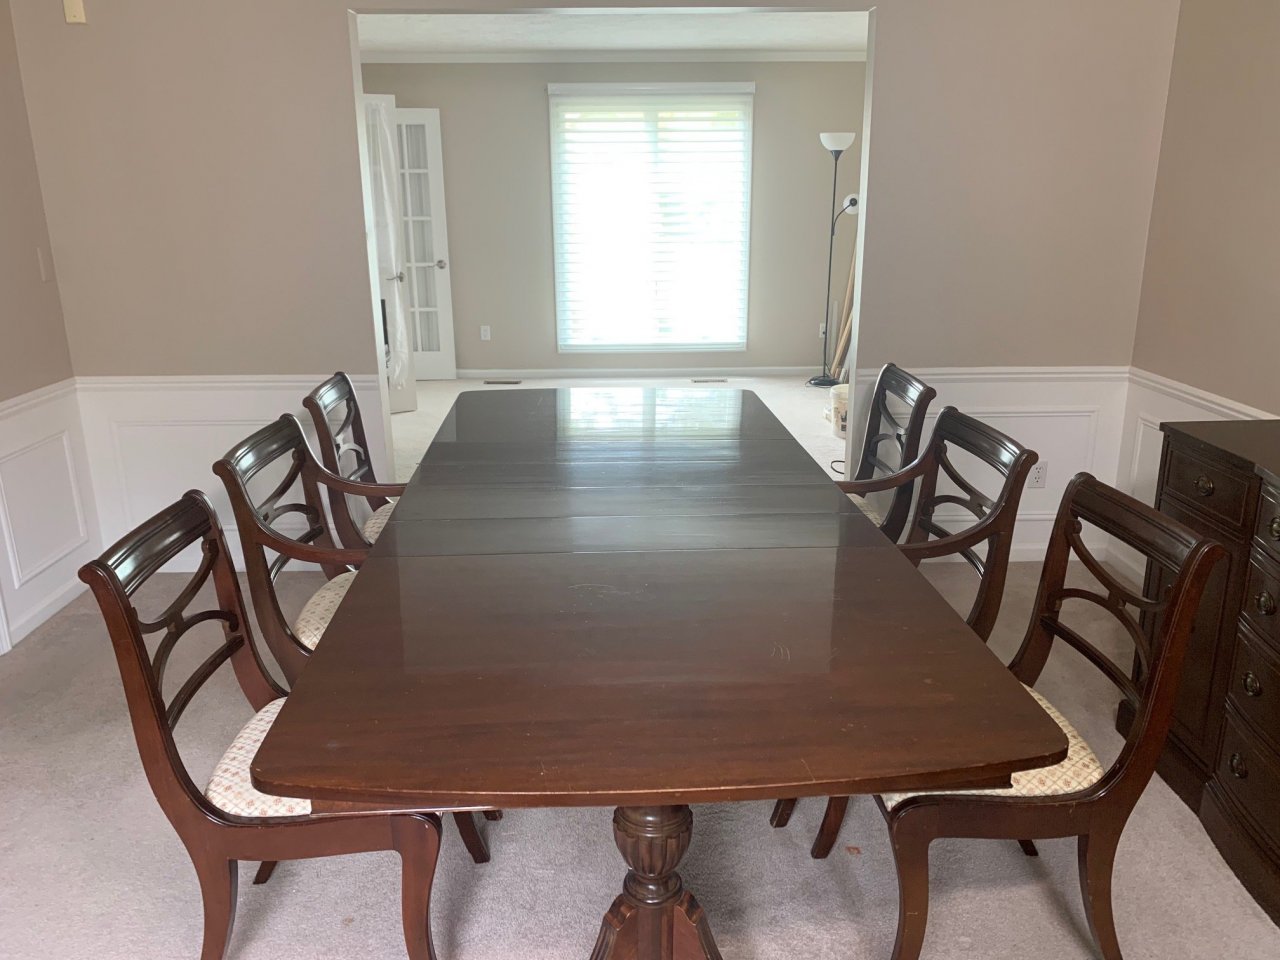 9 Piece Dining Room Set My Antique Furniture Collection